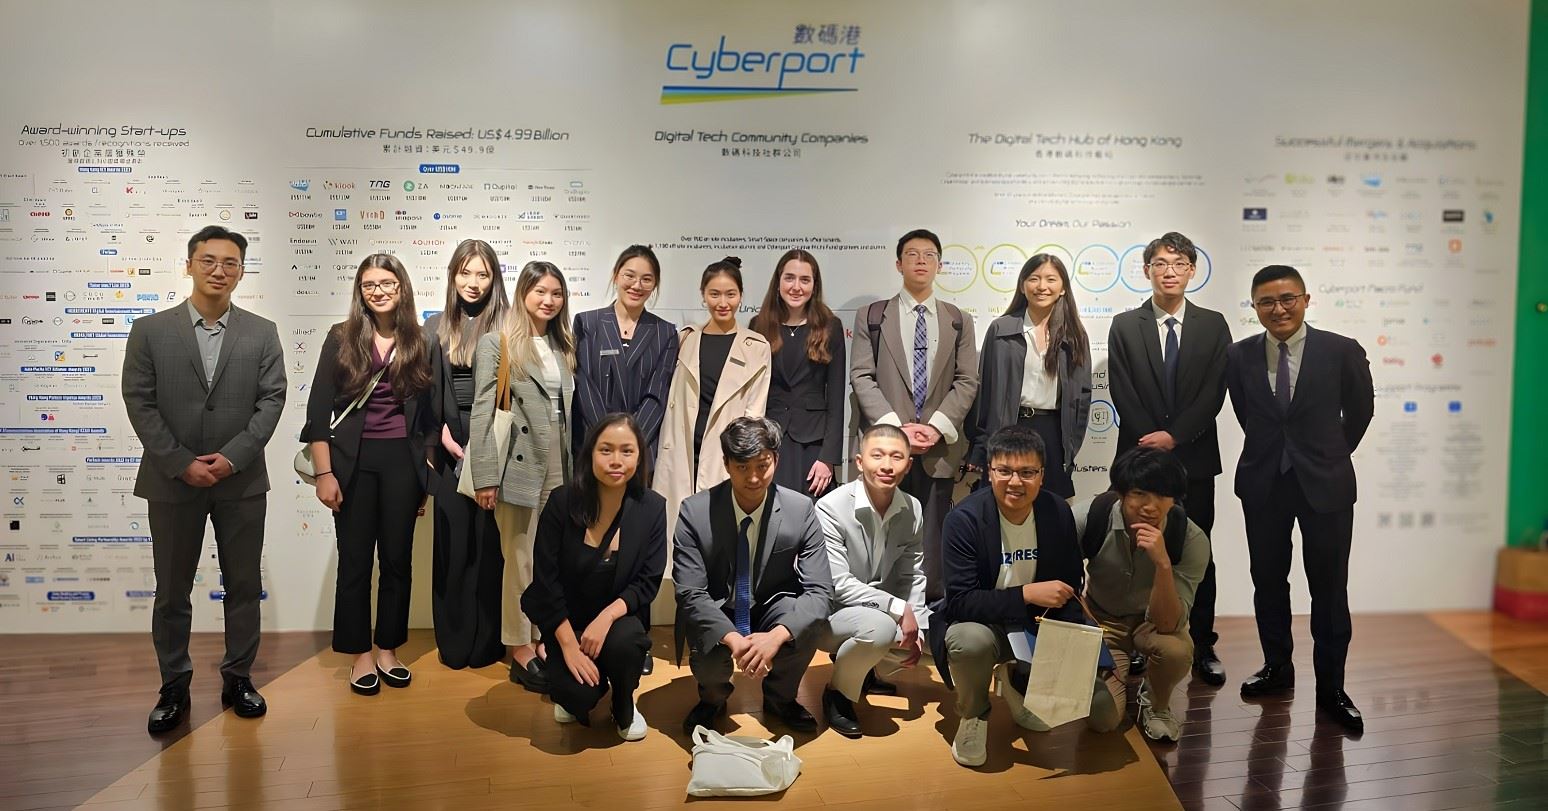 Students visiting Cyberport